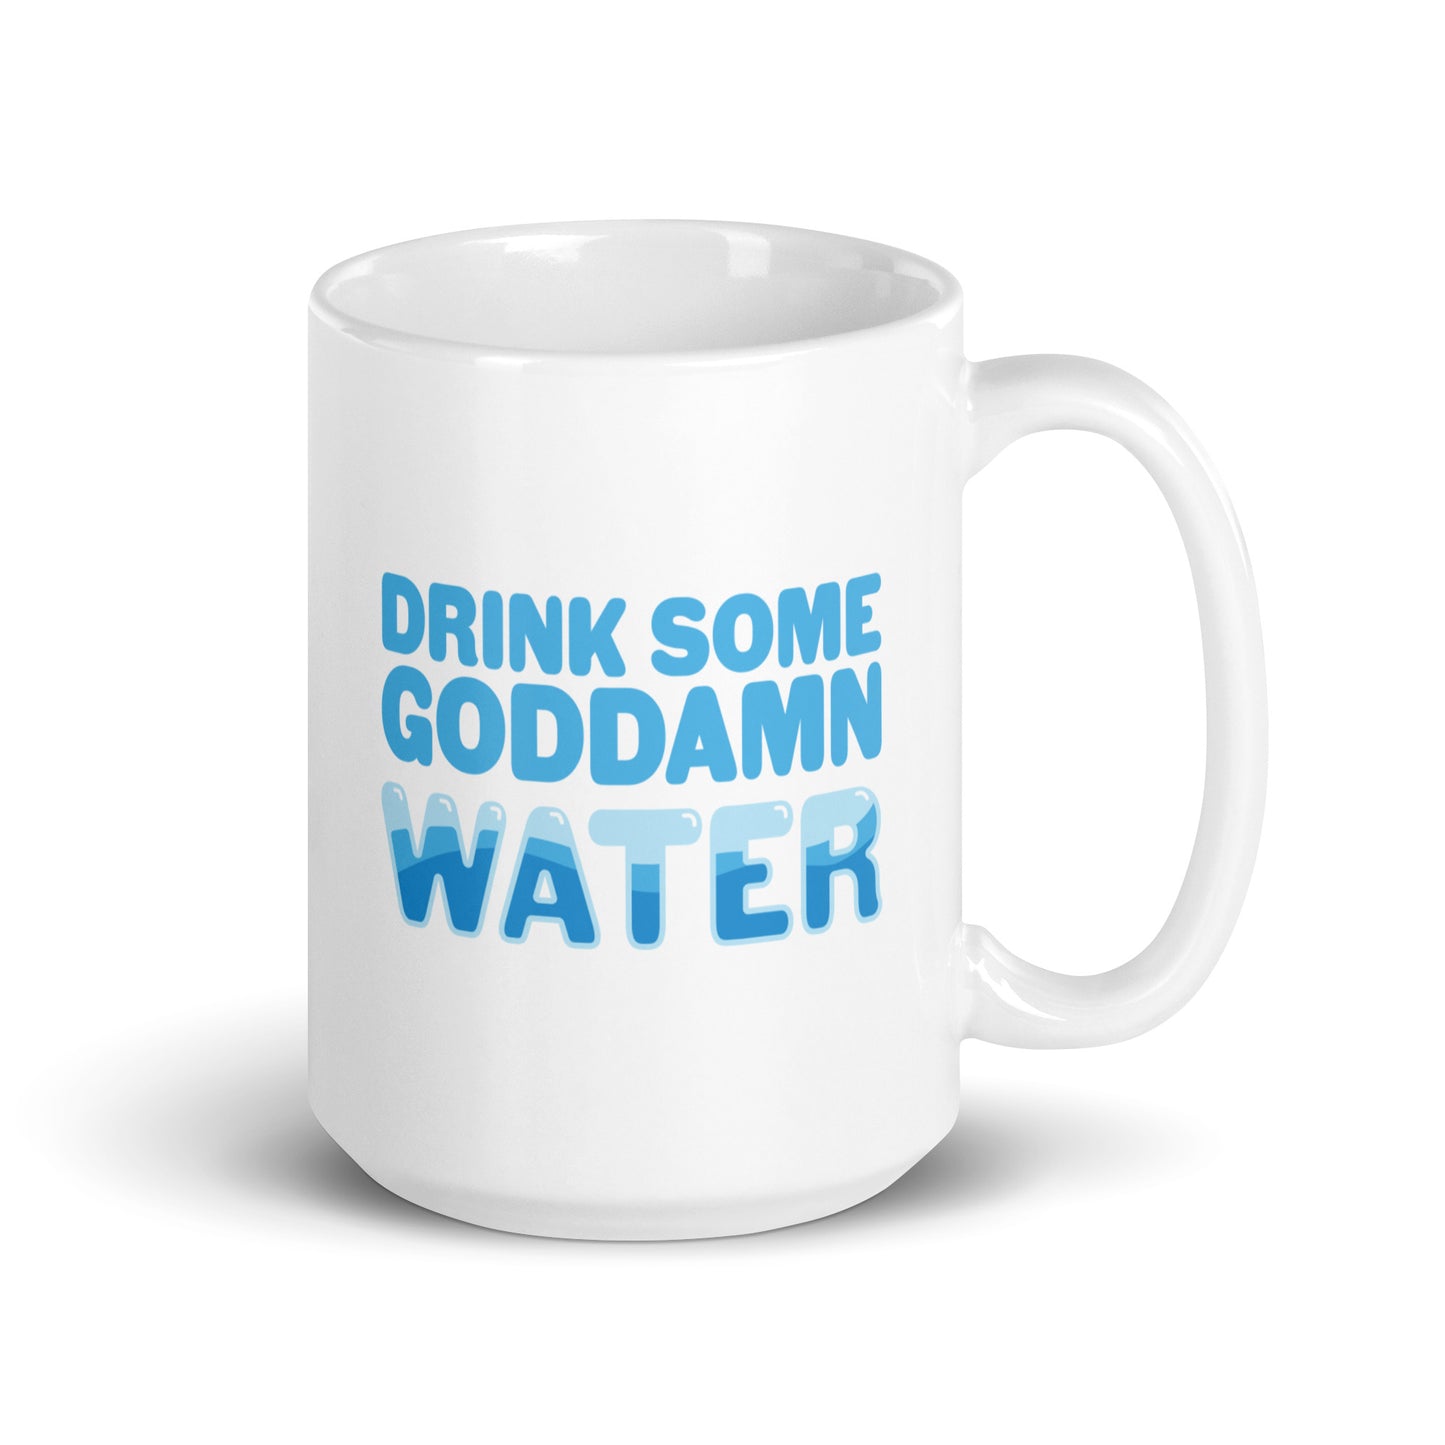 A white 15 ounce ceramic mug with blue bubble letters that read "Drink some goddamn water"